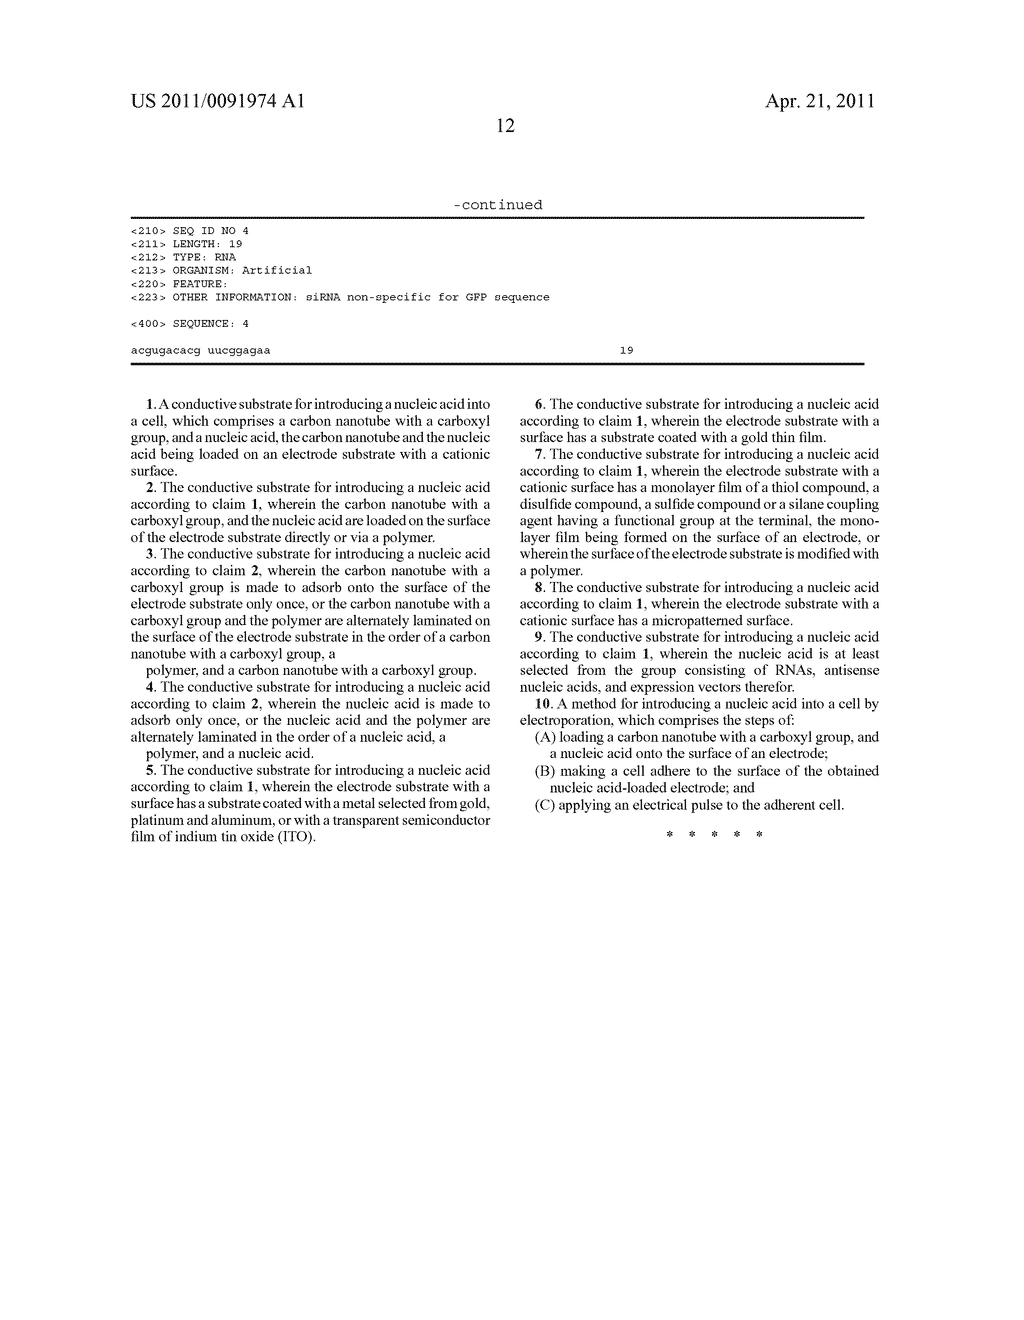 Conductive Substrate and Method for Introducing Nucleic Acid - diagram, schematic, and image 21